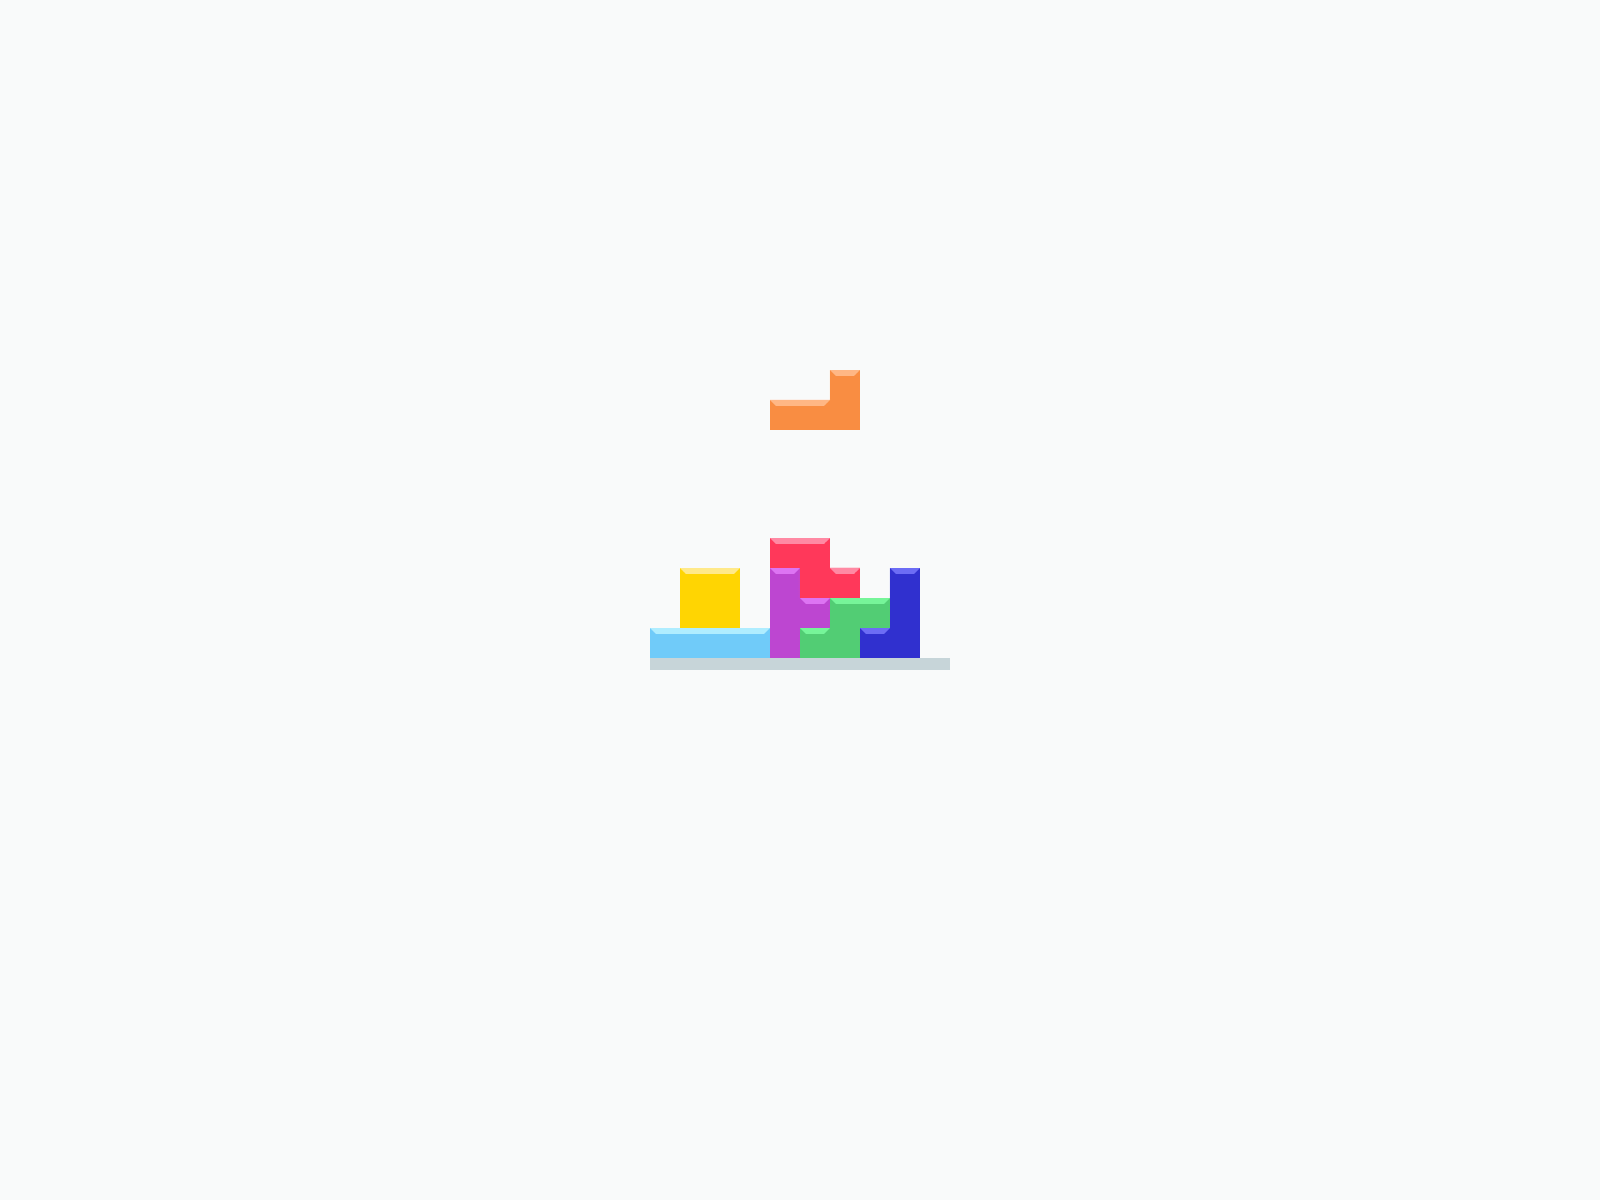 Tetris Loading Animation by Kevin Yang on Dribbble